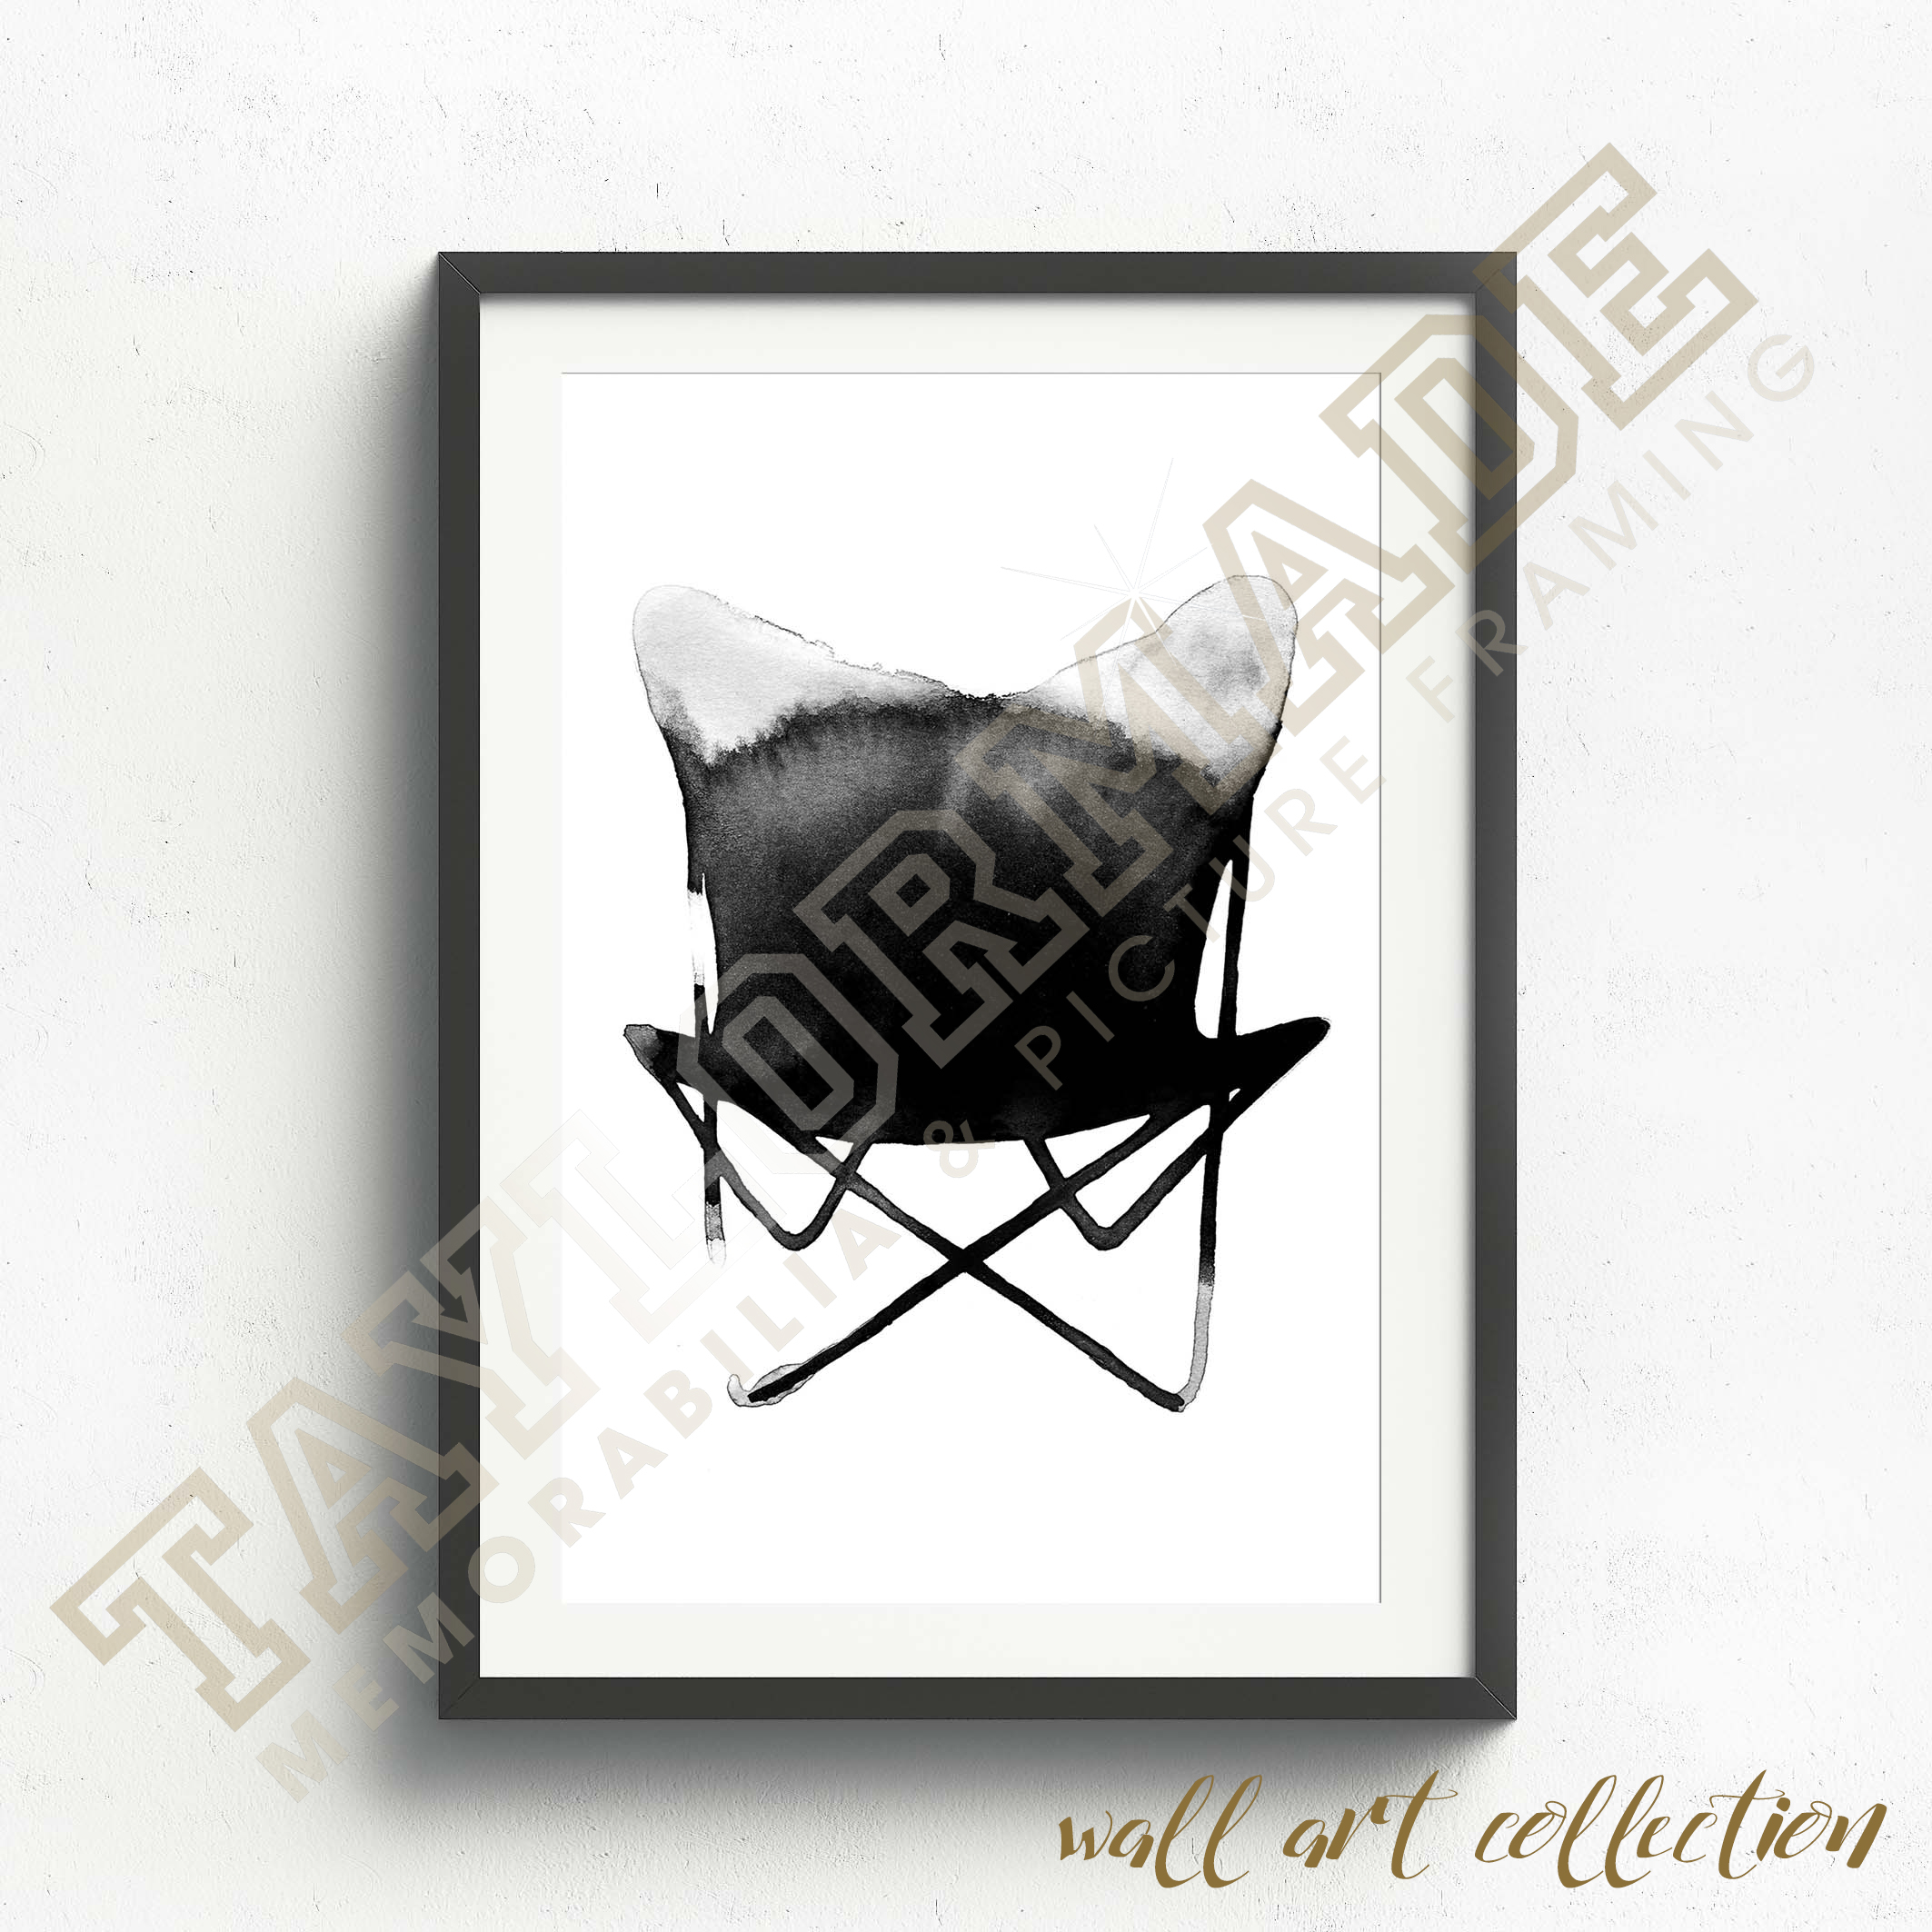 Wall Art Collection – Butterfly Chair